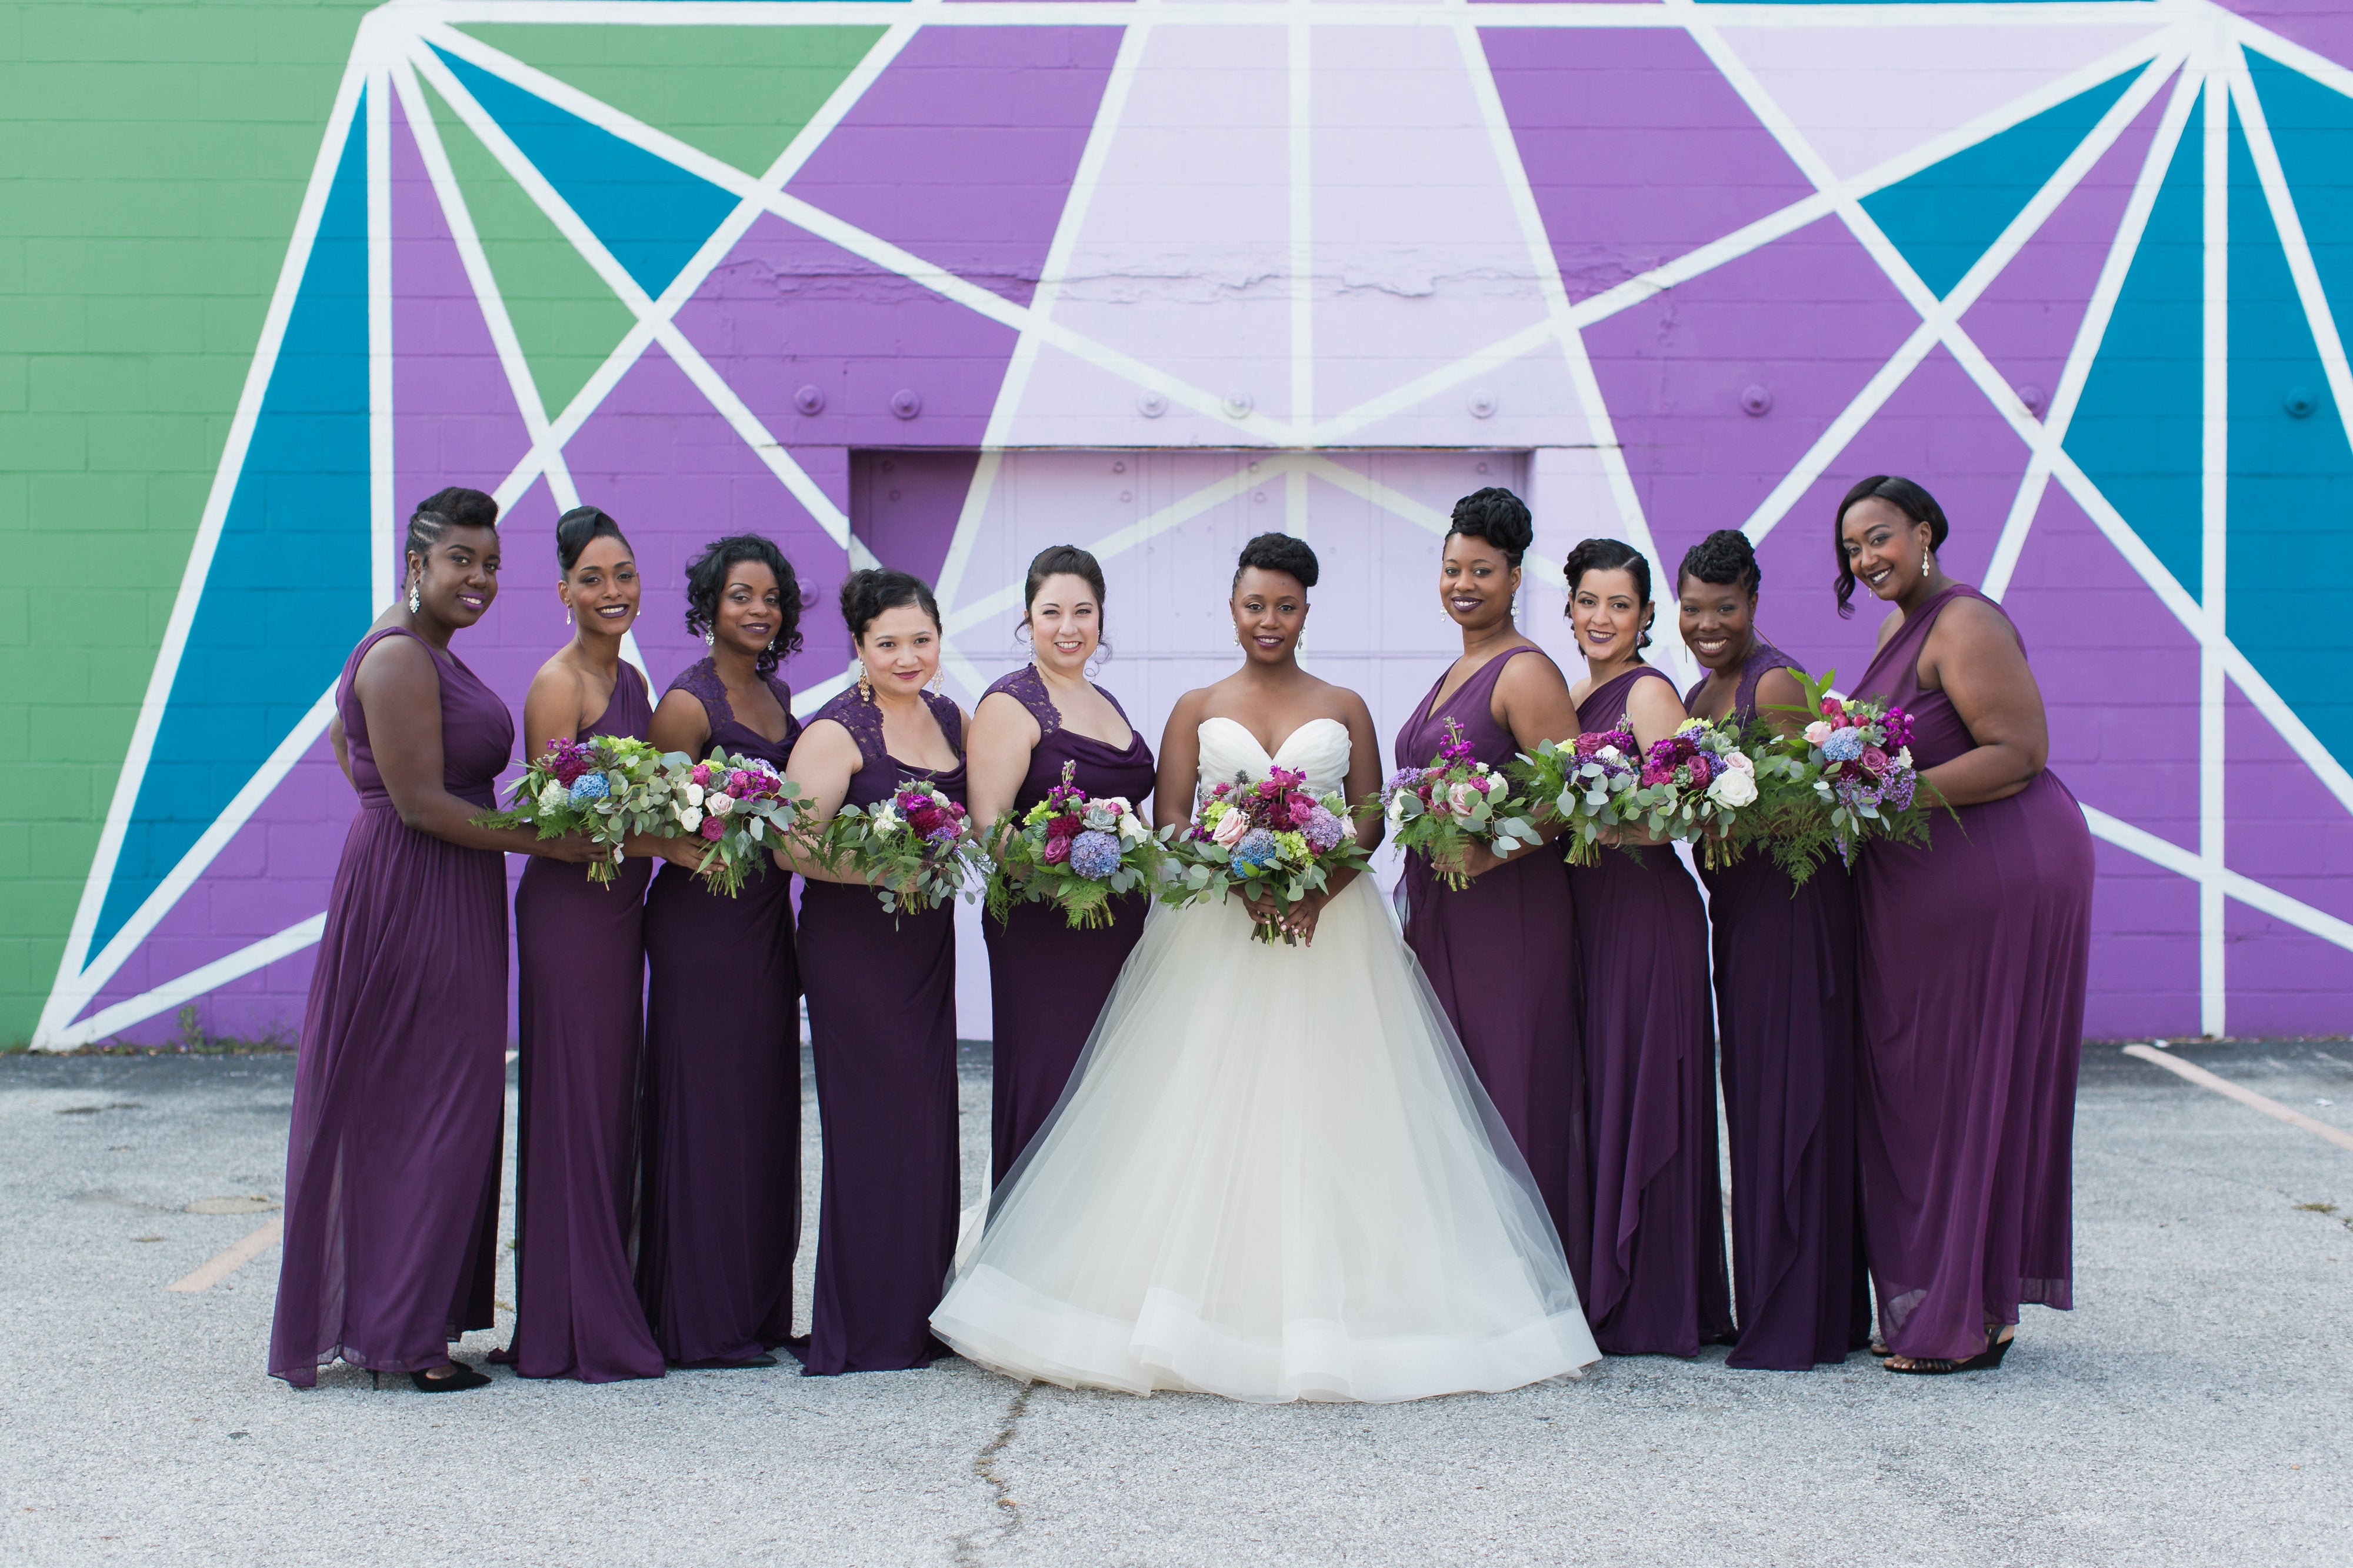 Bridal Bliss: Cottrell And Niles' Modern Wedding Was Simply Marvelous
